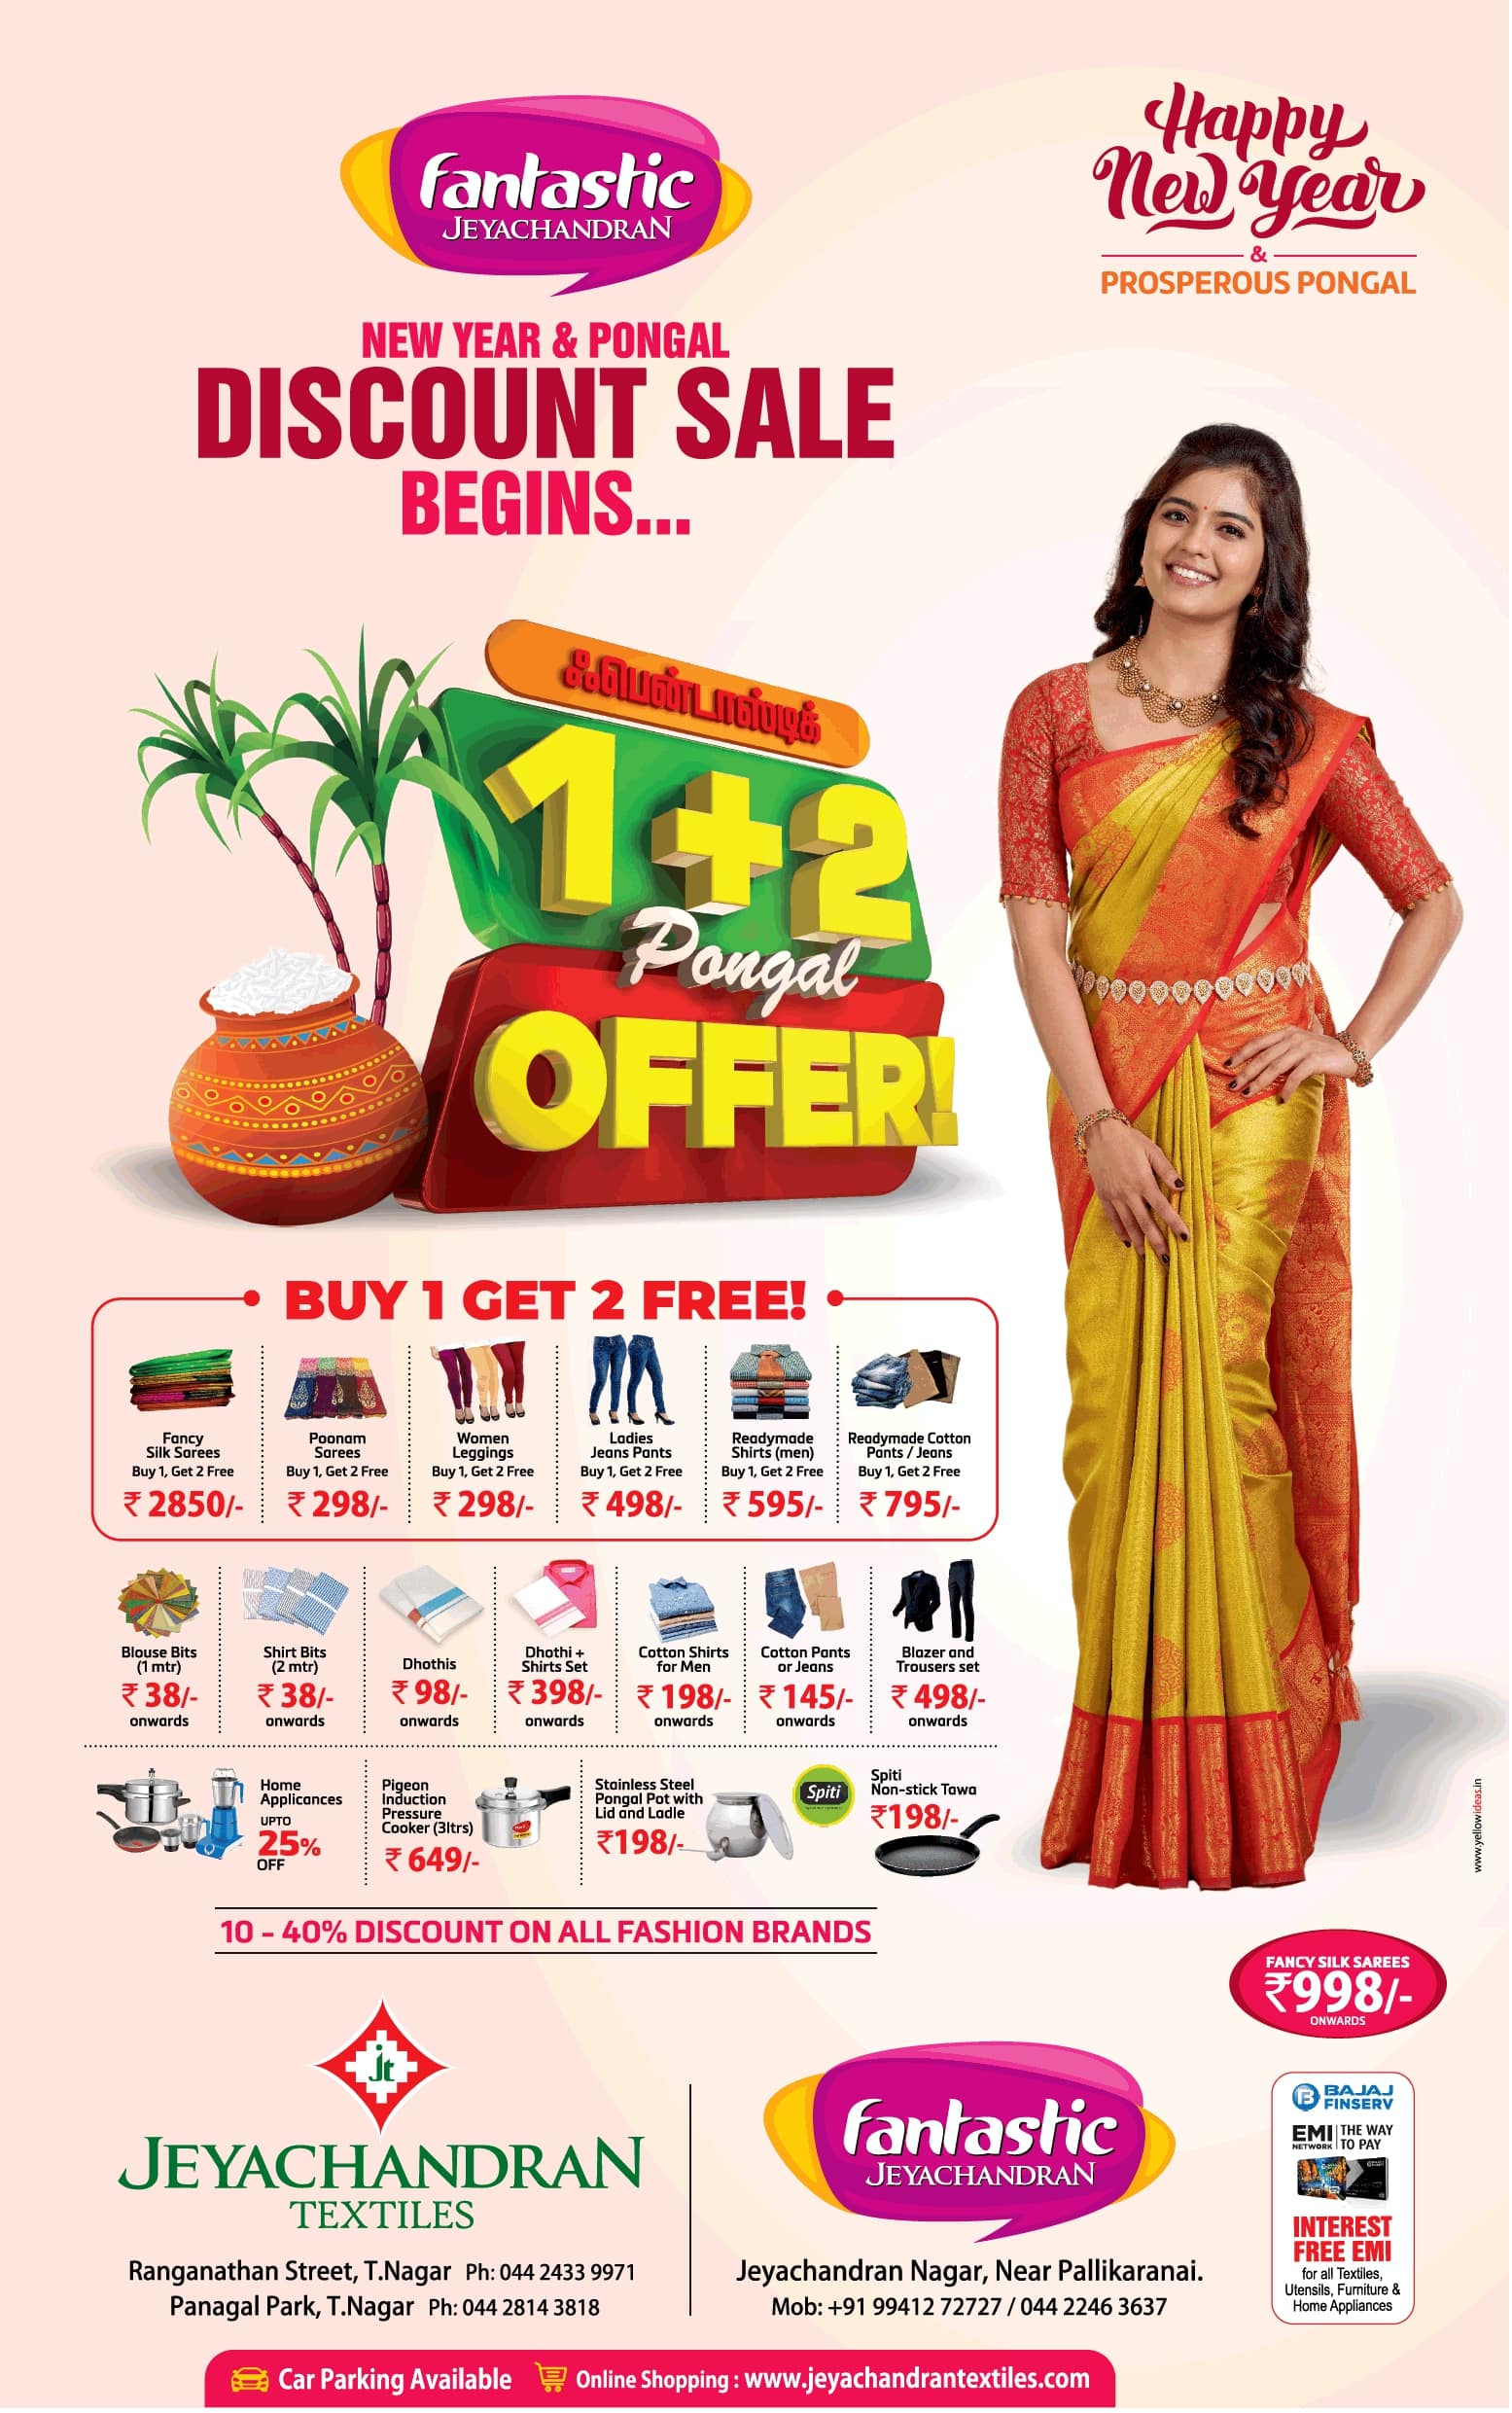 jeyachandran-textiles-new-year-and-pongal-discount-sale-begins-ad-chennai-times-31-12-2020